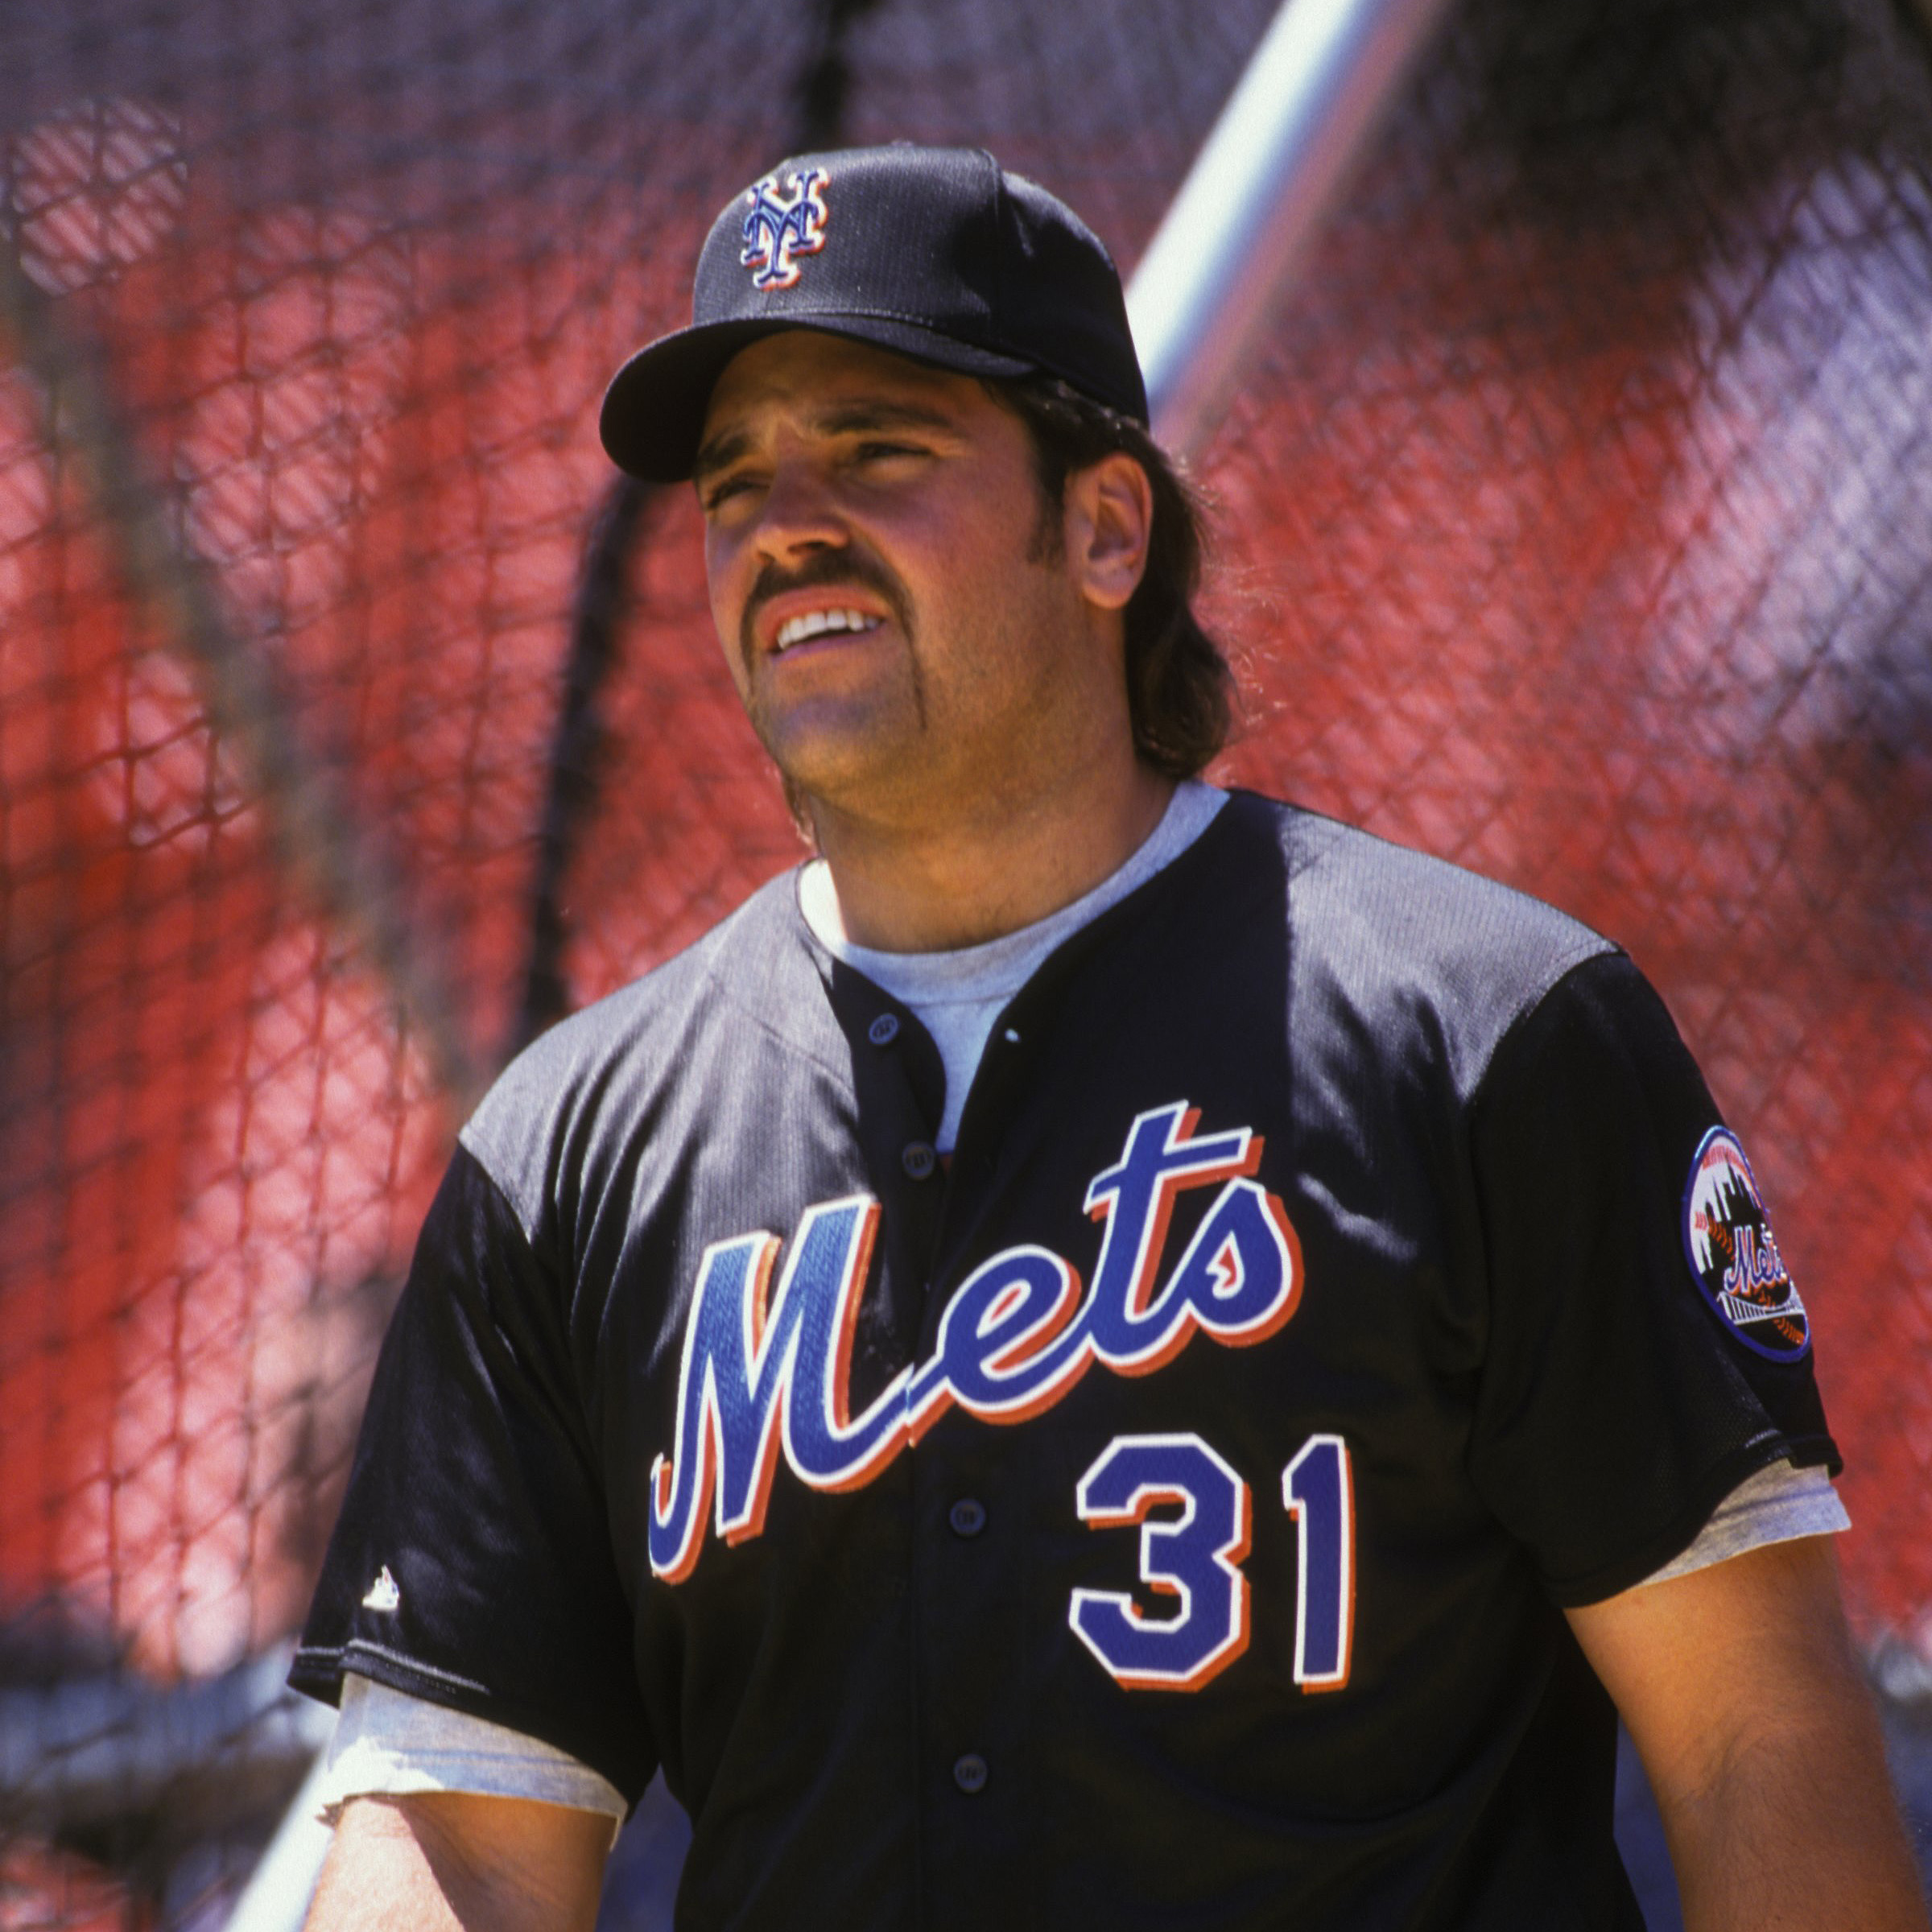 Mets to wear black uniforms for first time since 2011 on July 30 vs. Reds 